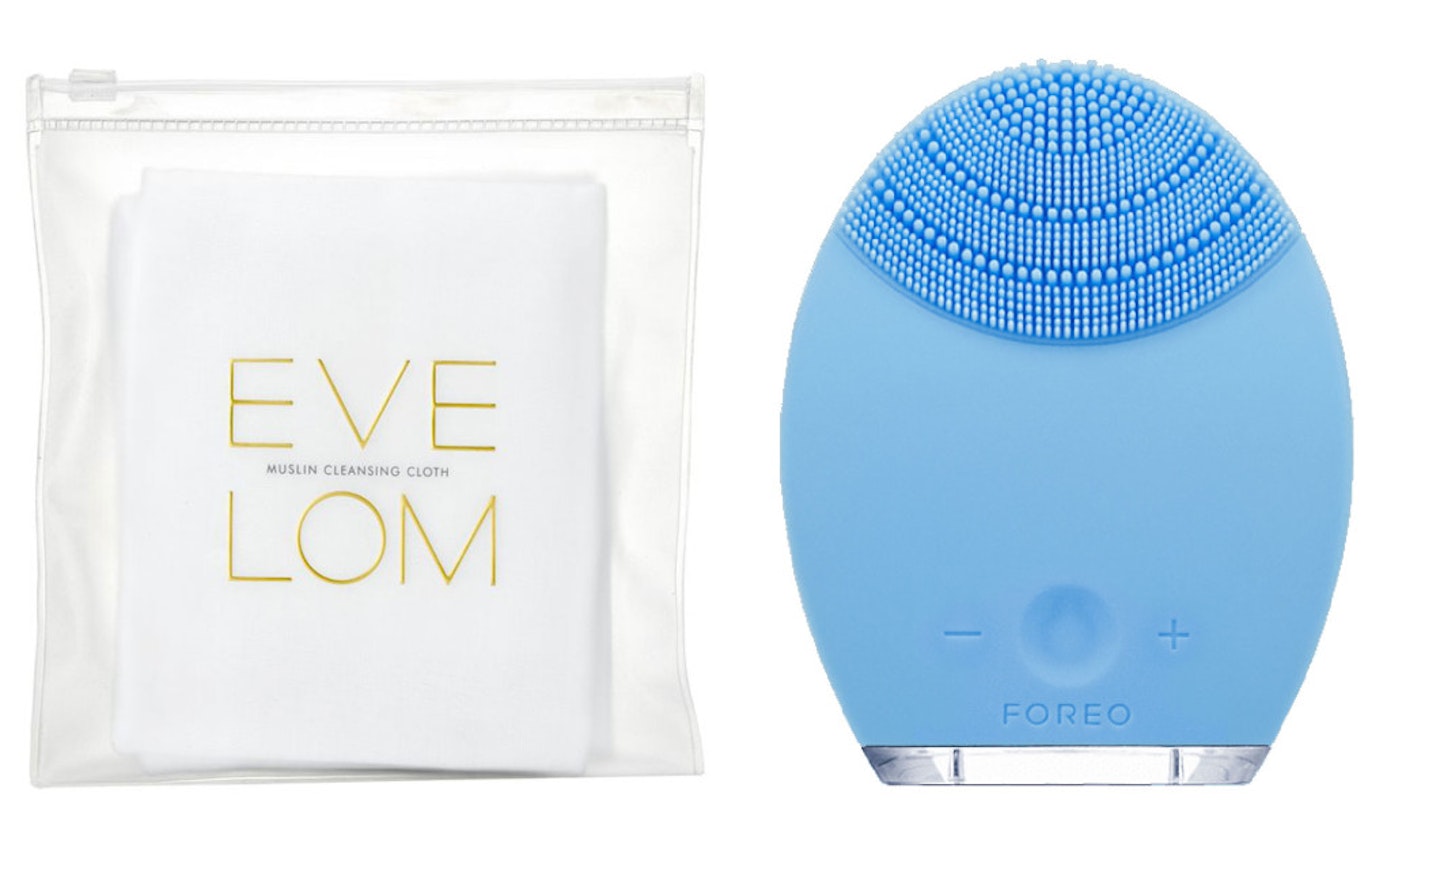 Eve Lom muslin cleansing cloths, &pound;14, FOREO Luna, from &pound;99,